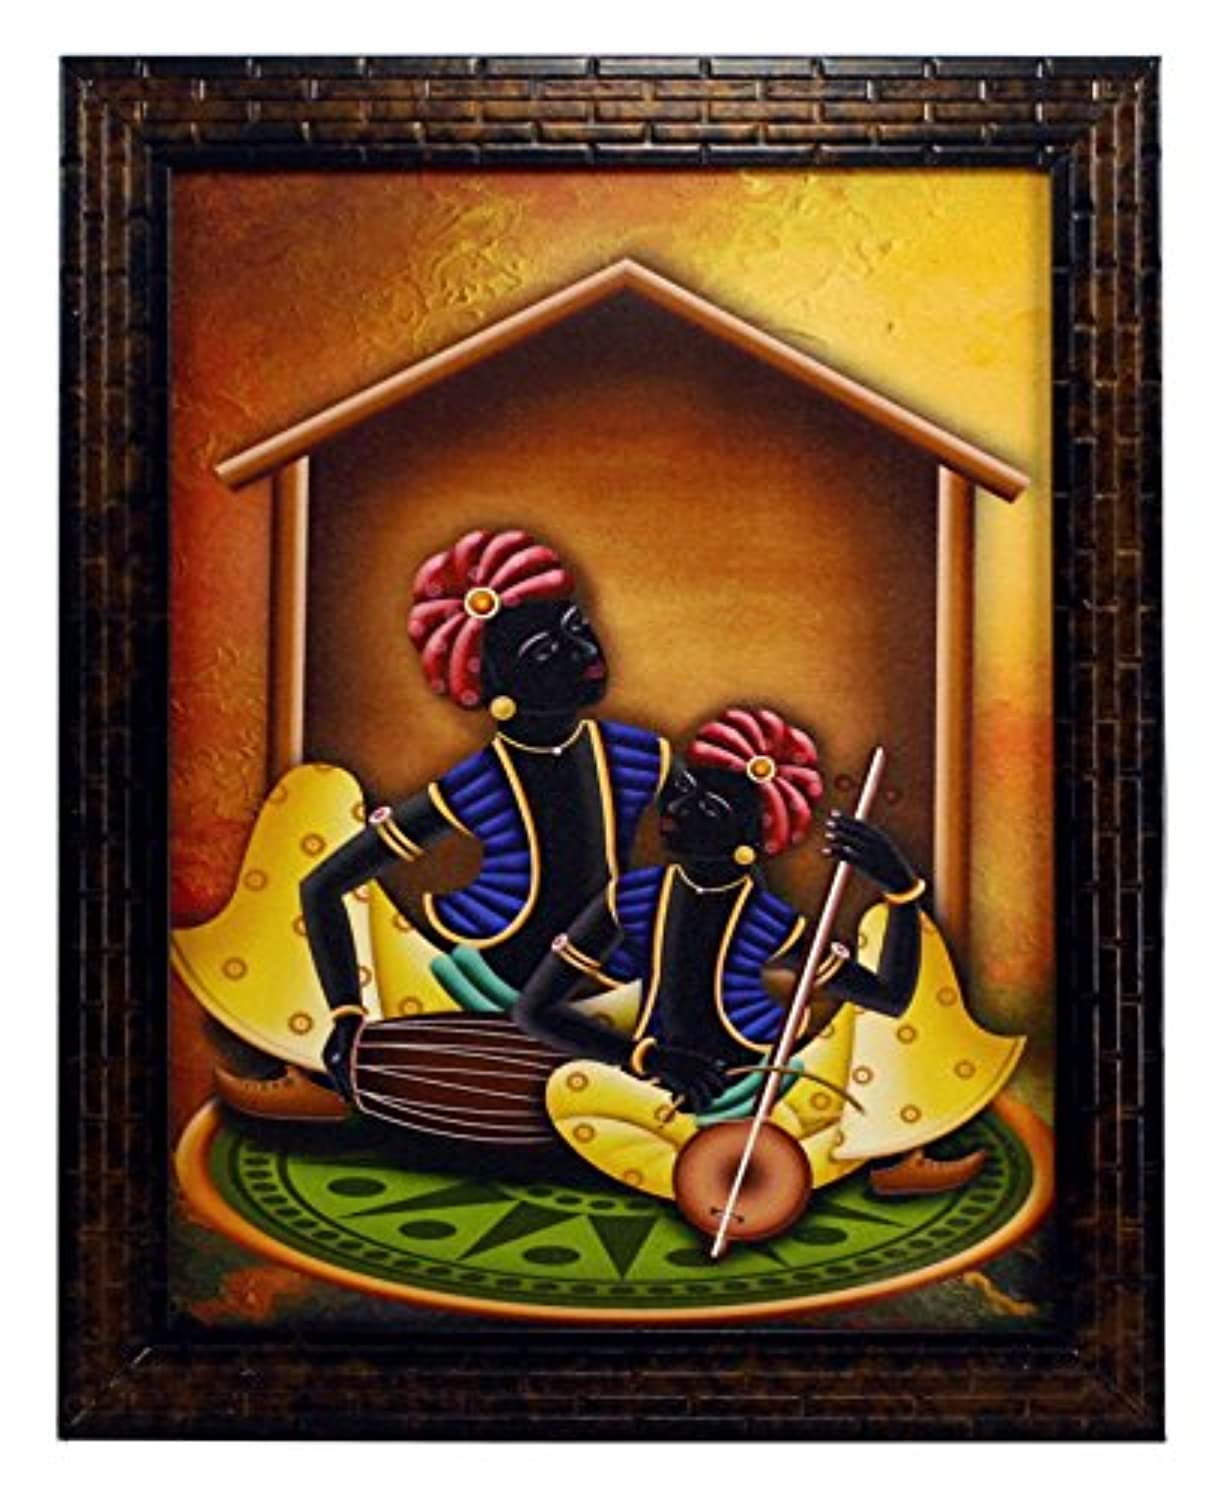 Set of 3 Rajasthani Folk Music & Dance Paintings Without Glass